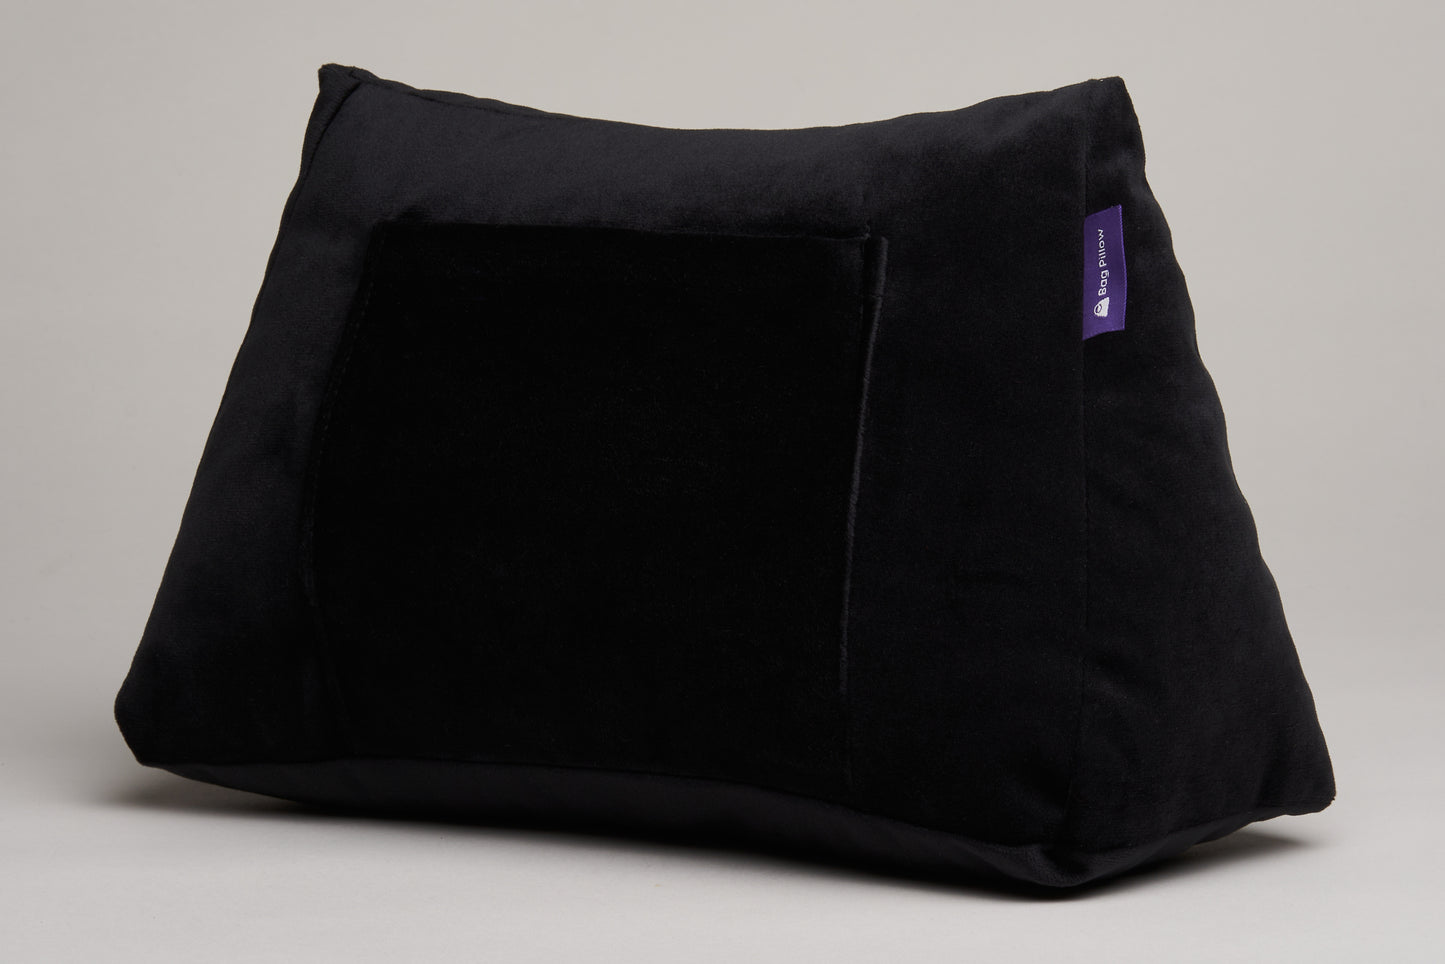 Bag Pillow Tailored Fit for KL 28